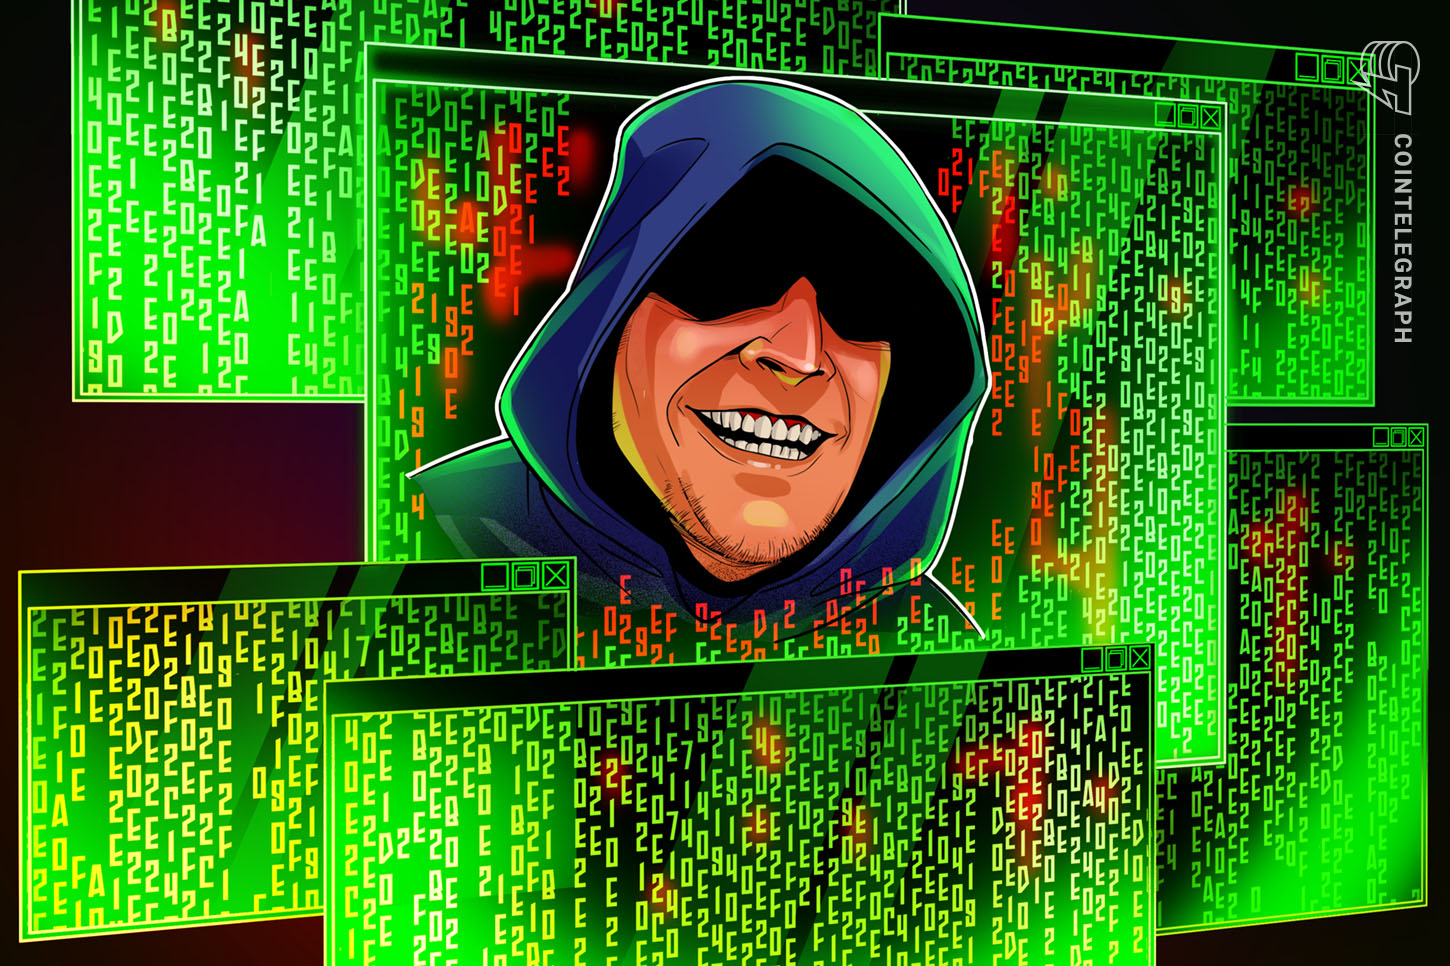 A Hacker is Trying to Promote a Las Vegas Resort Database for Crypto